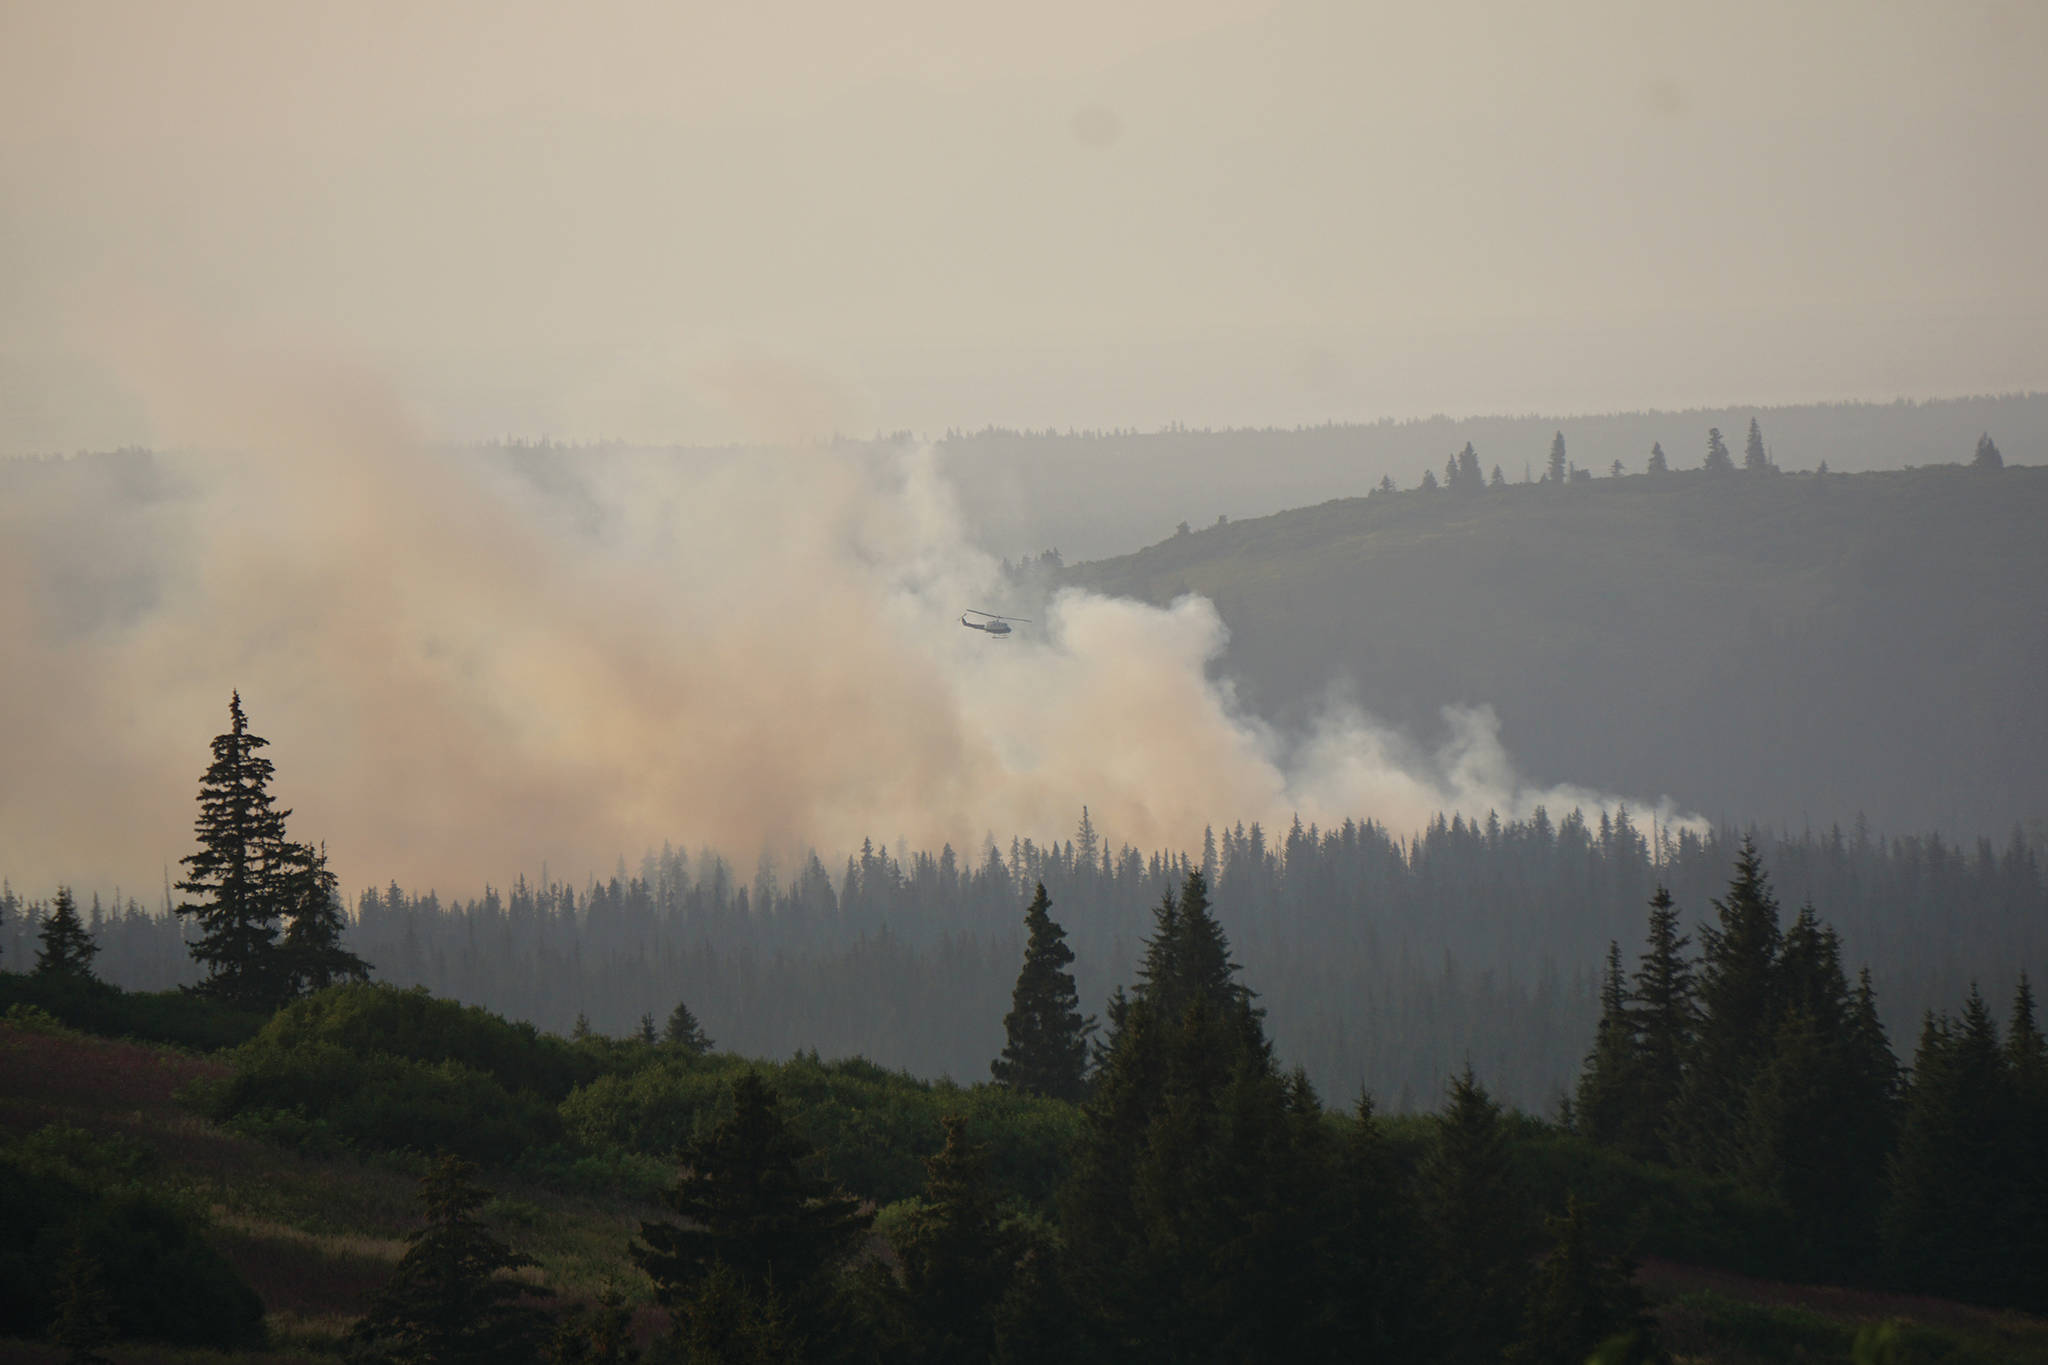 A helicopter flies over the North Fork fire as it burns near the south end of the North Fork Road on Sunday evening, Aug. 18, 2019, near Homer, Alaska, as seen from Diamond Ridge Road. (Photo by Michael Armstrong/Homer News)